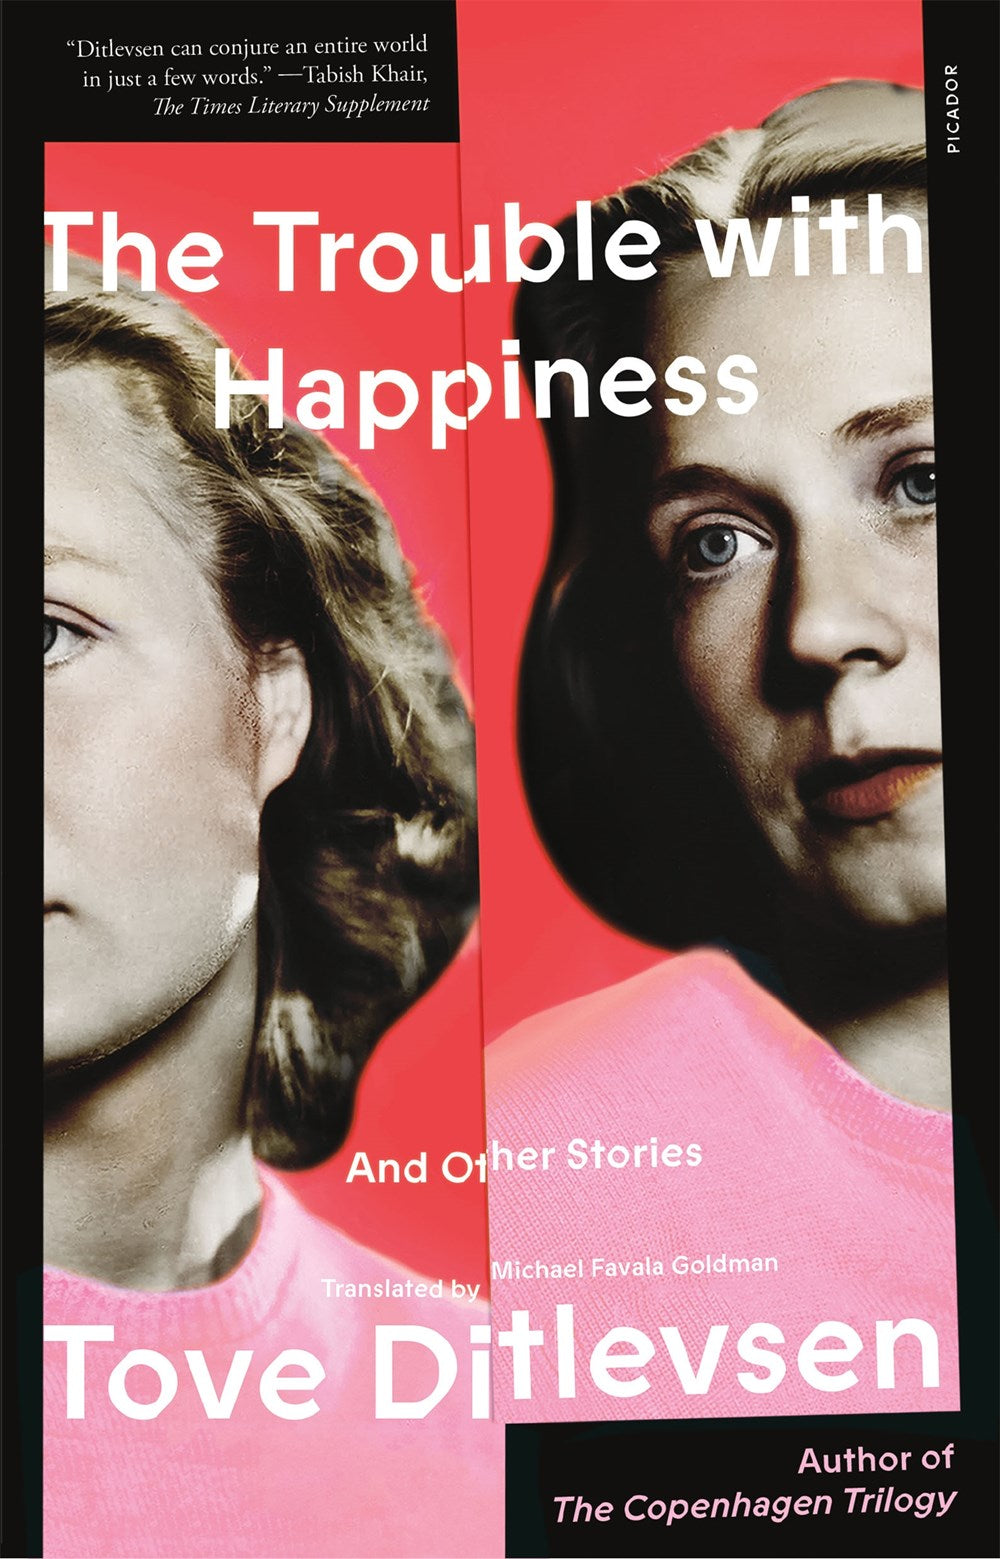 The Trouble with Happiness and Other Stories by Tove Ditlevsen (Translated by Tiina Nunnally)